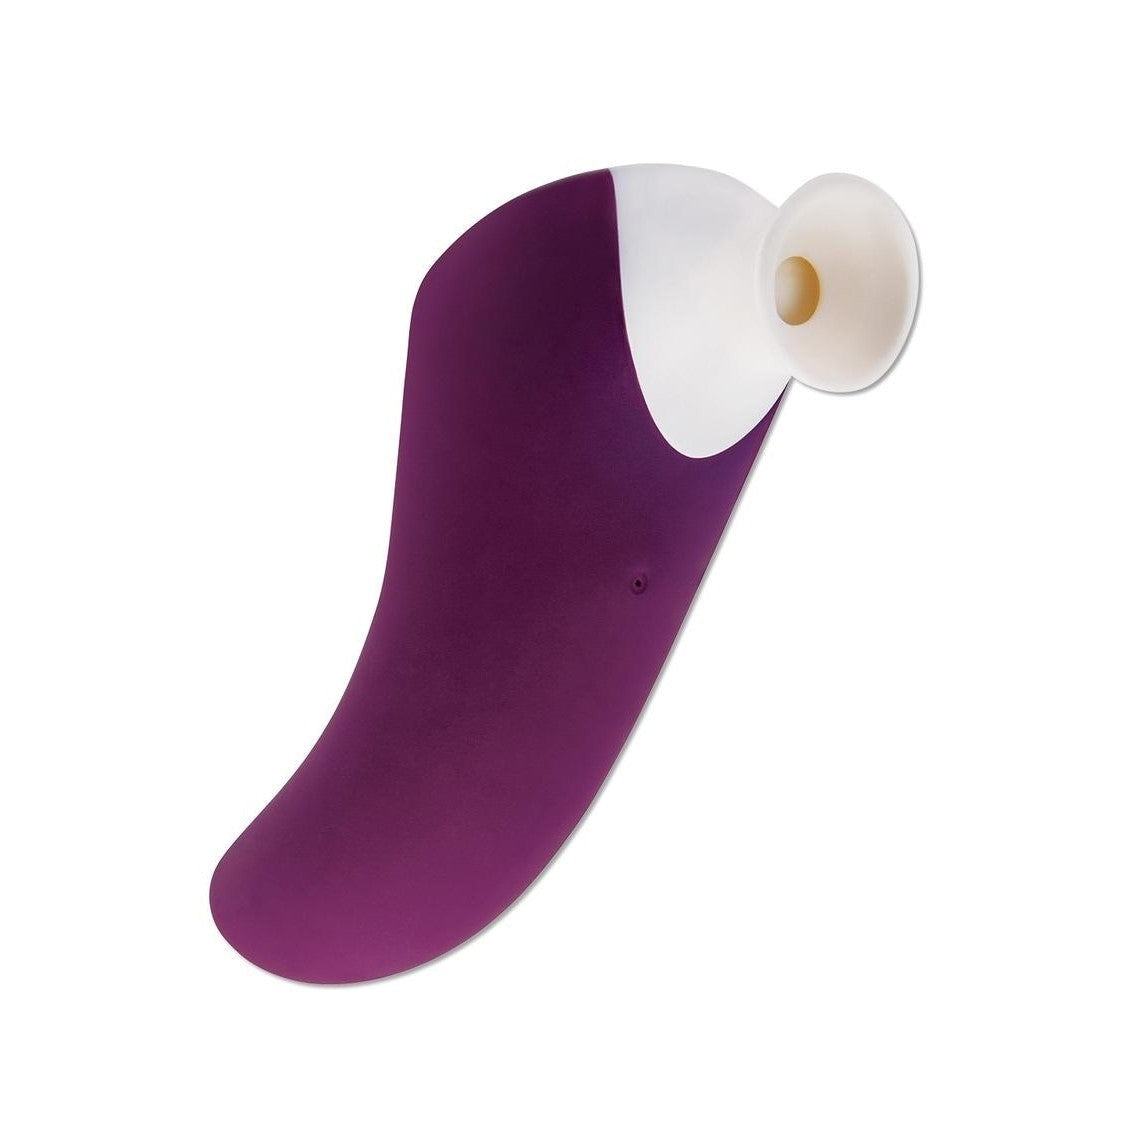 Bodywand Vibro Kiss Intimates Adult Boutique